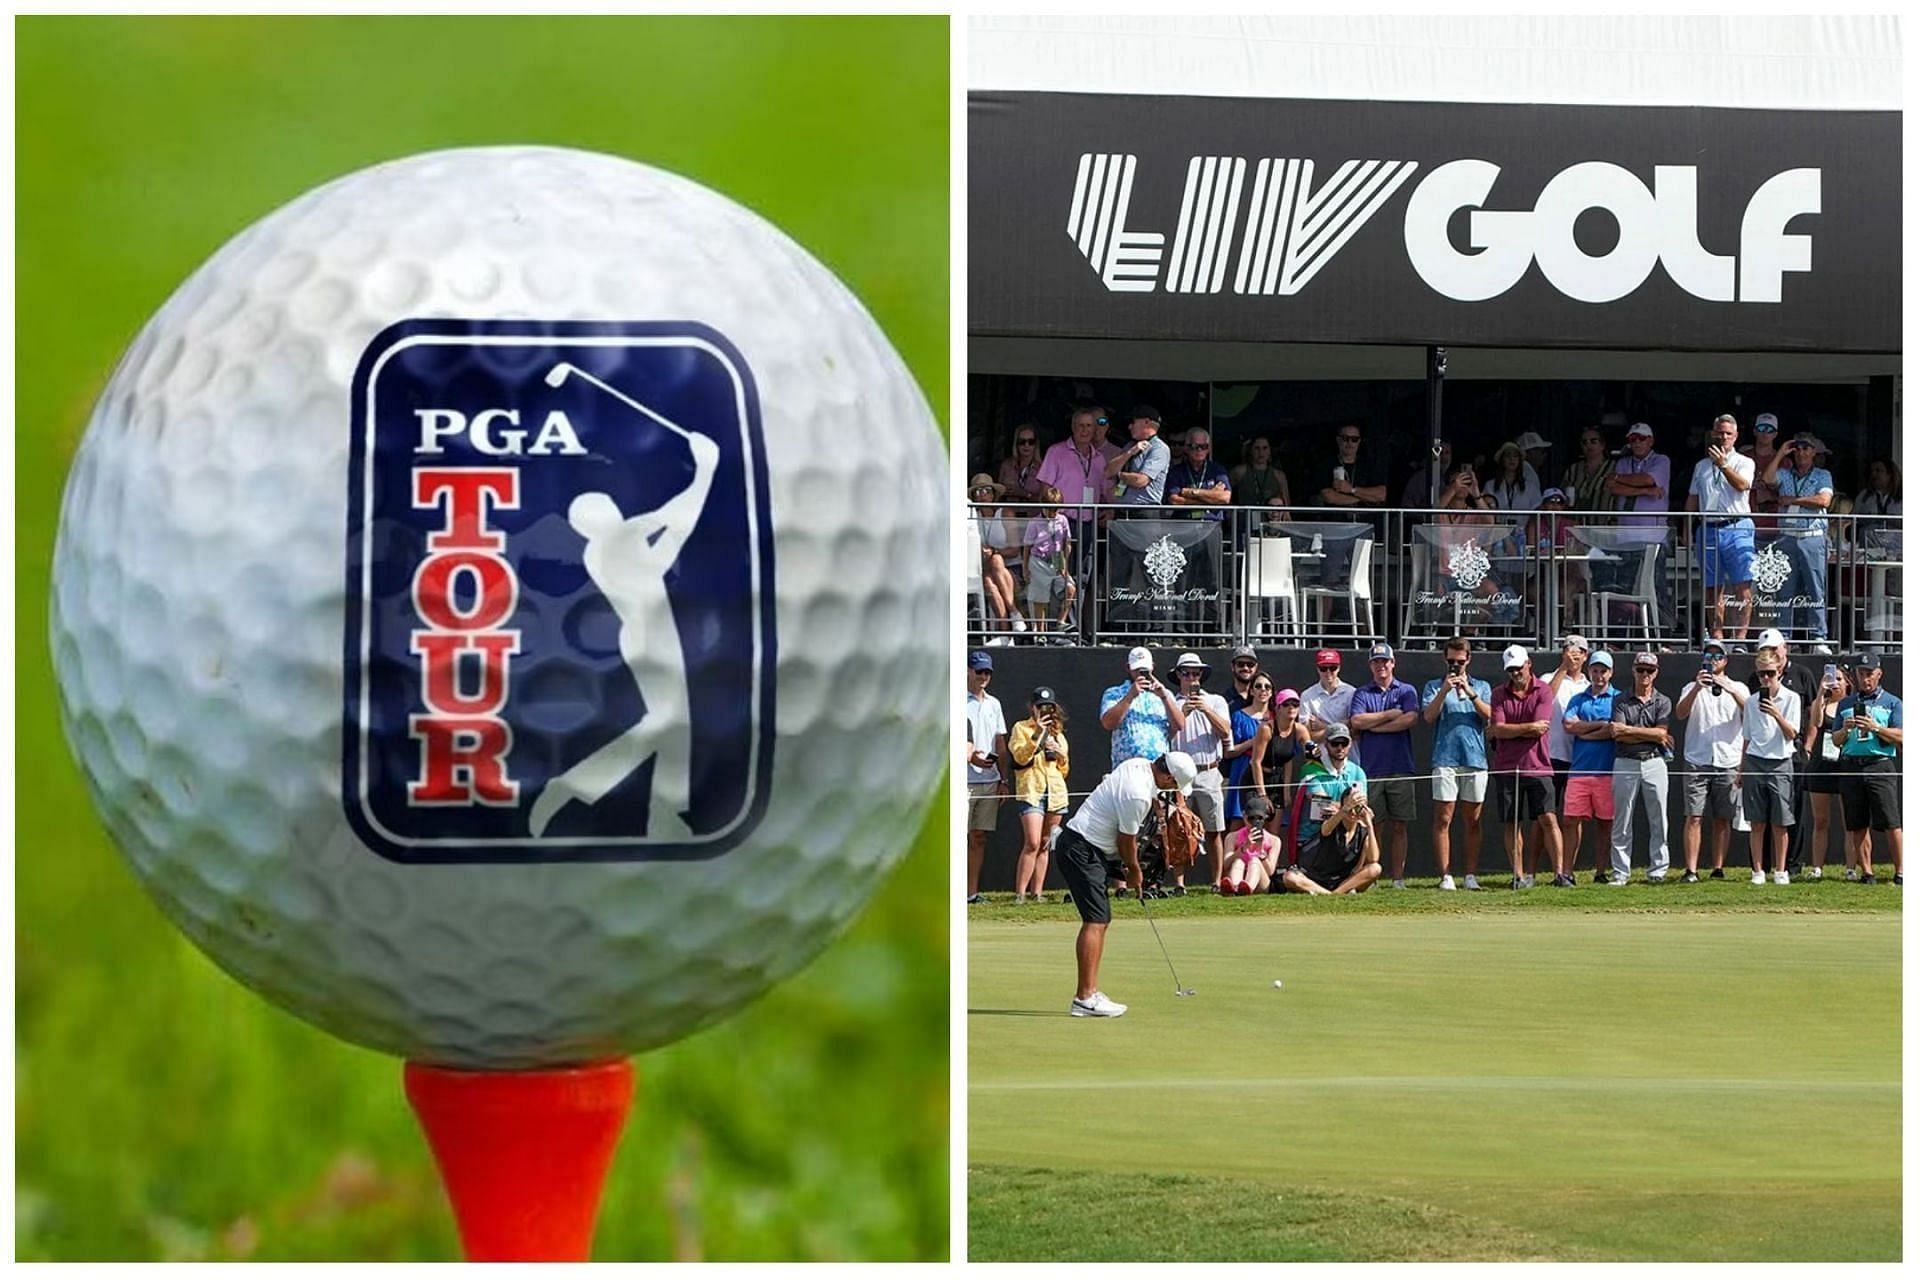 PGA Tour and LIV Golf to merge after the latest agreement